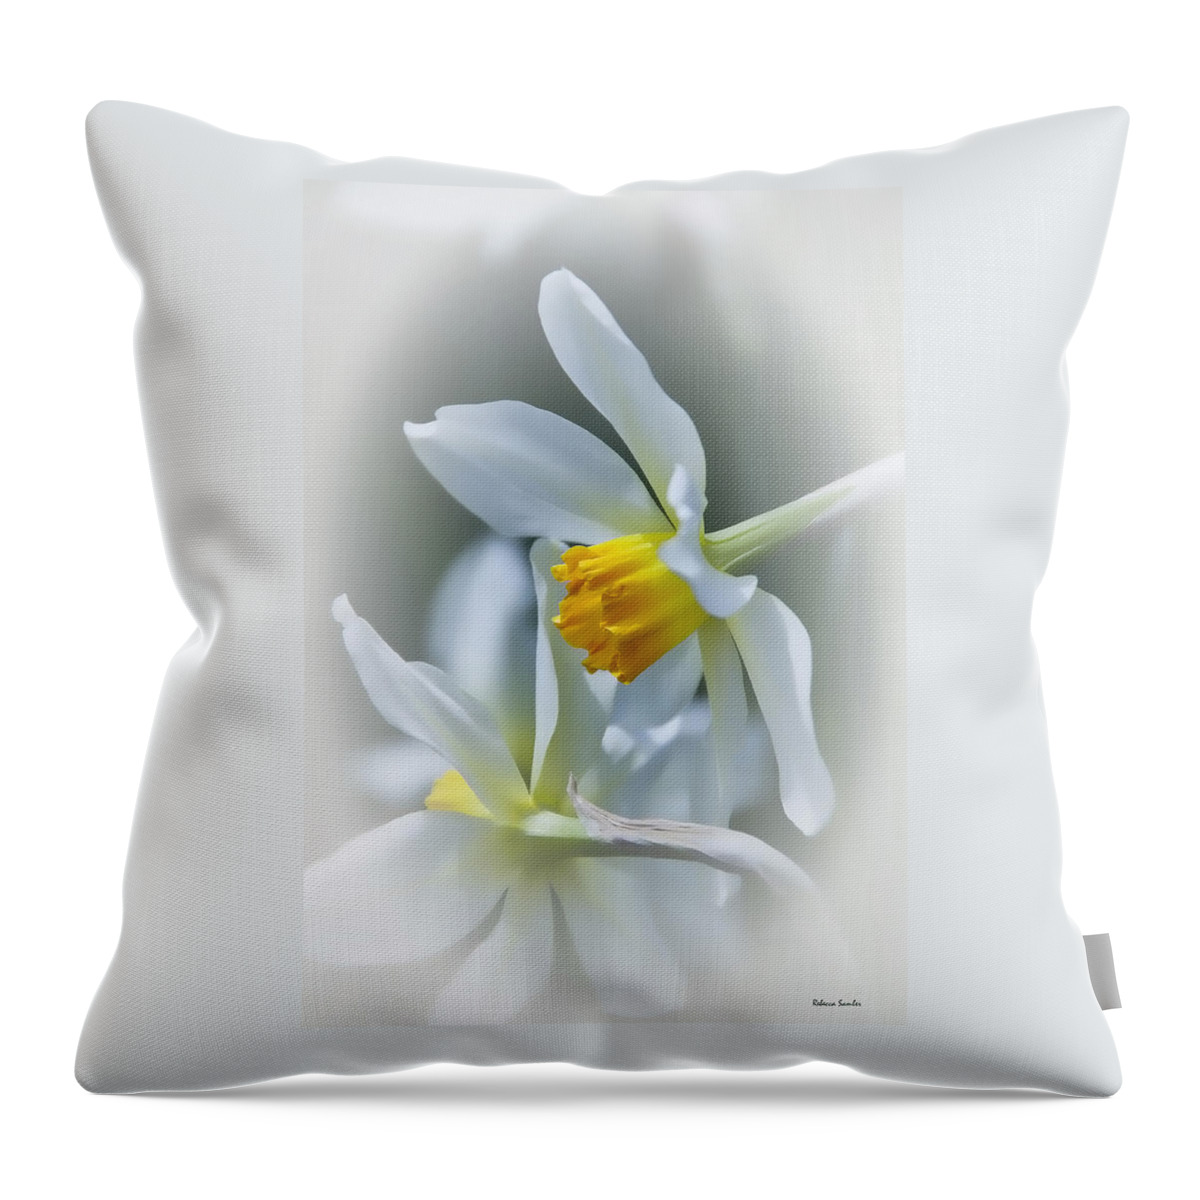 Narcissus Throw Pillow featuring the photograph Narcissus by Rebecca Samler